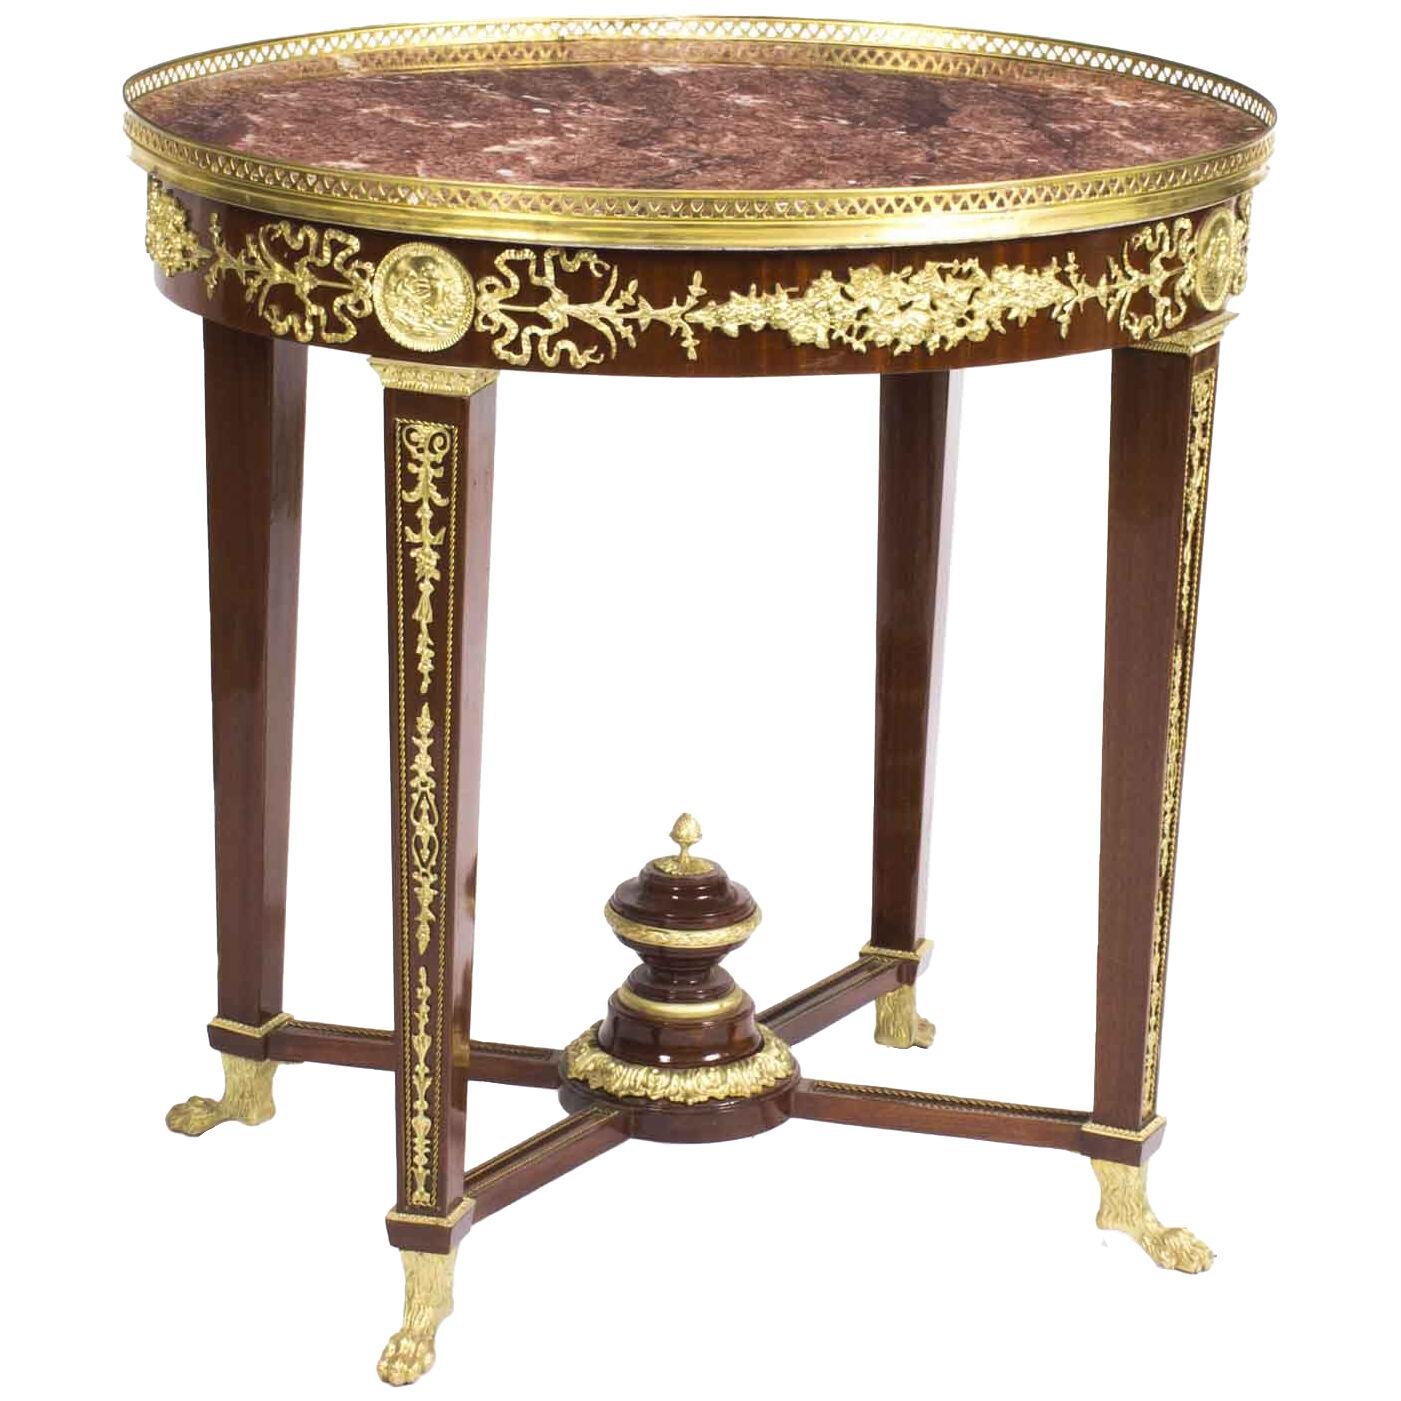 Vintage Empire Revival Marble Top Ormolu Mounted Occasional Table 20th C